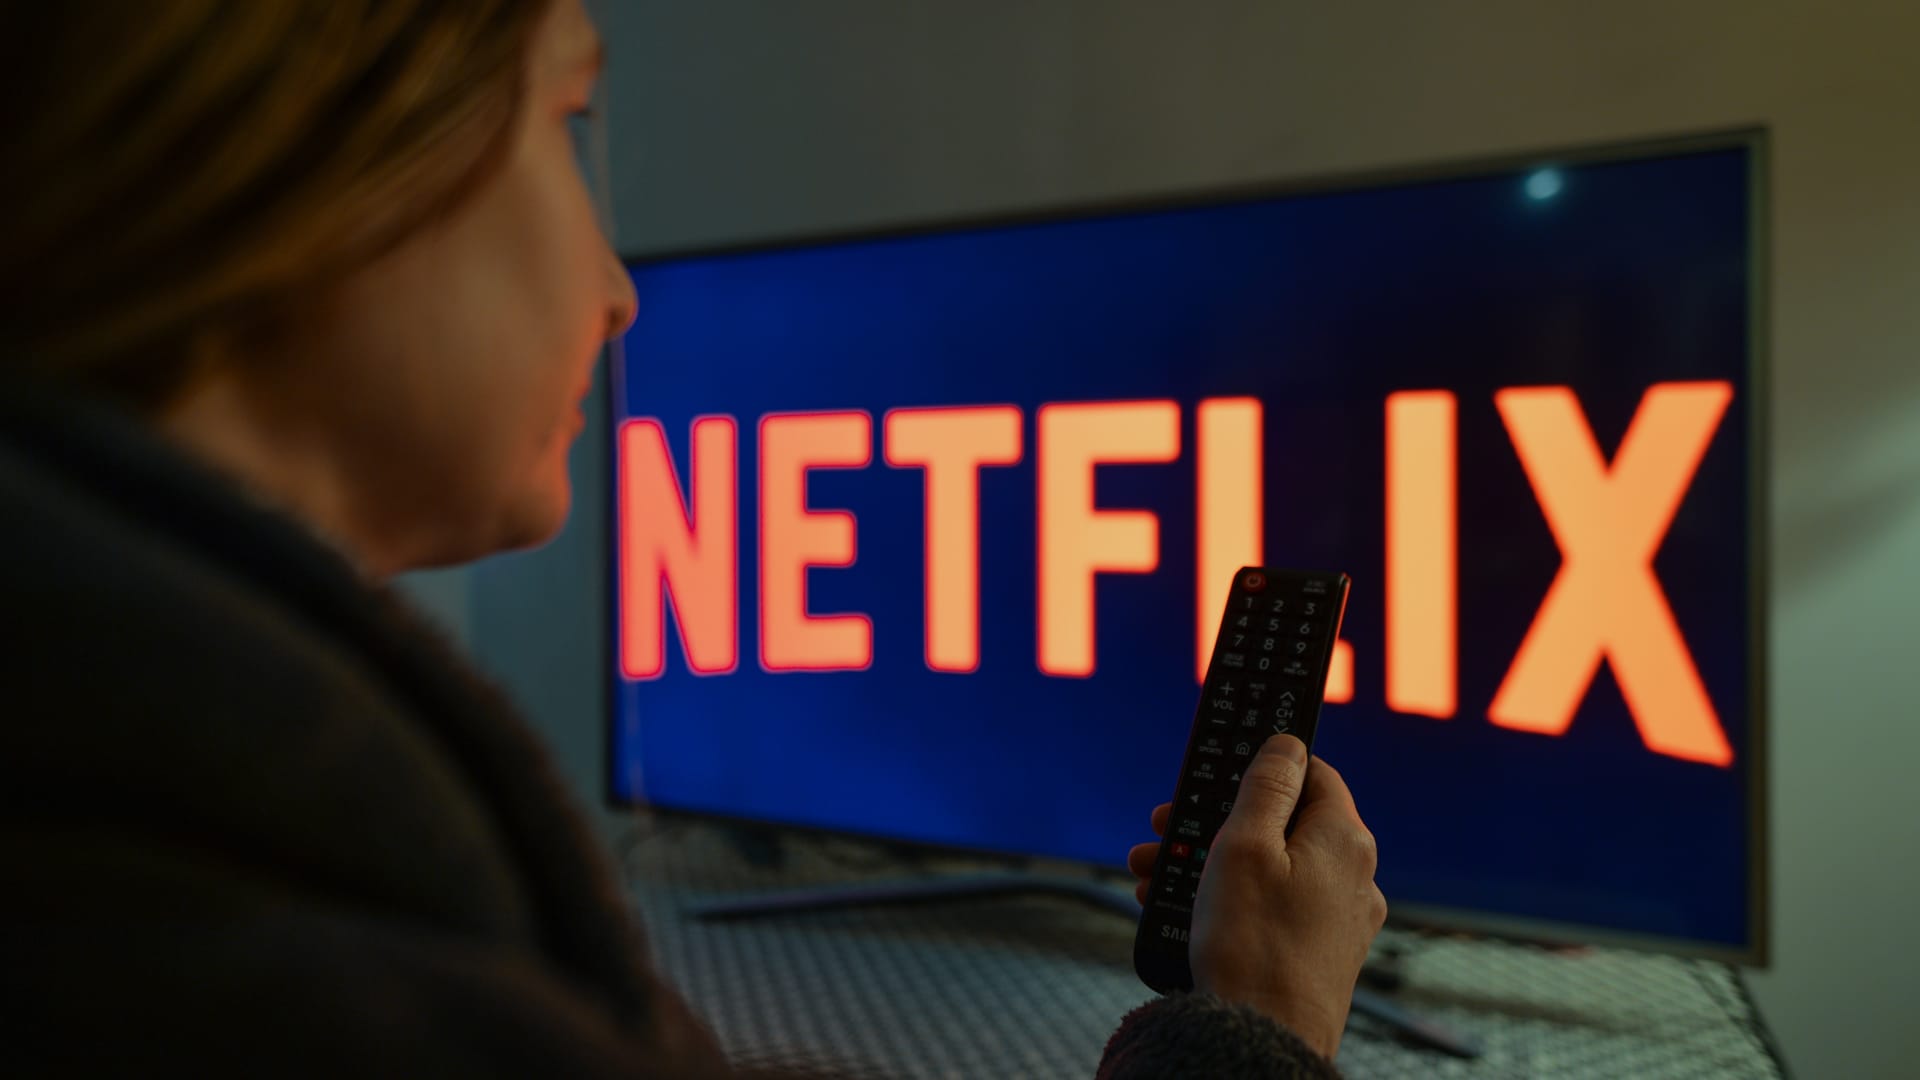 Netflix stock surges after earnings report, jump in subscribers